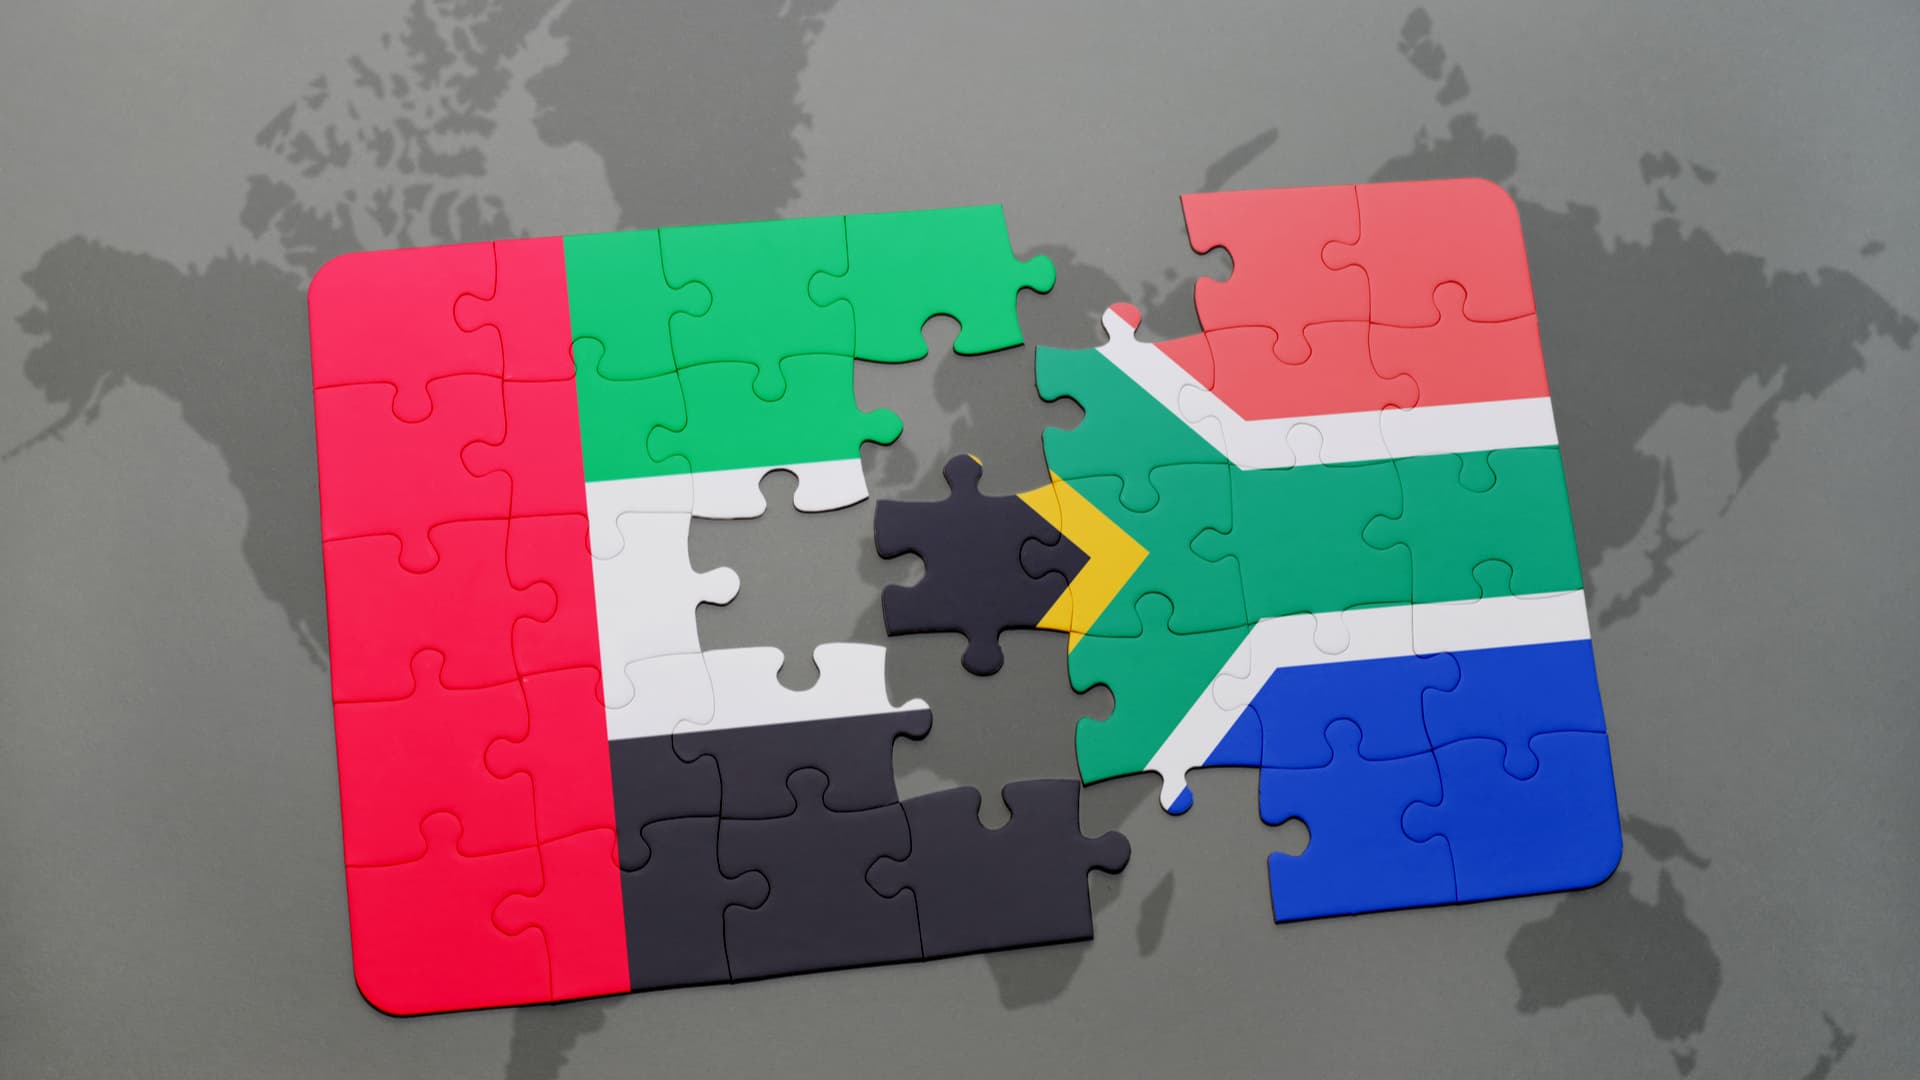 An image of the map of the world with the jigsaw puzzle of the South African flag being assembled on top of it. Moving to the UAE from South Africa